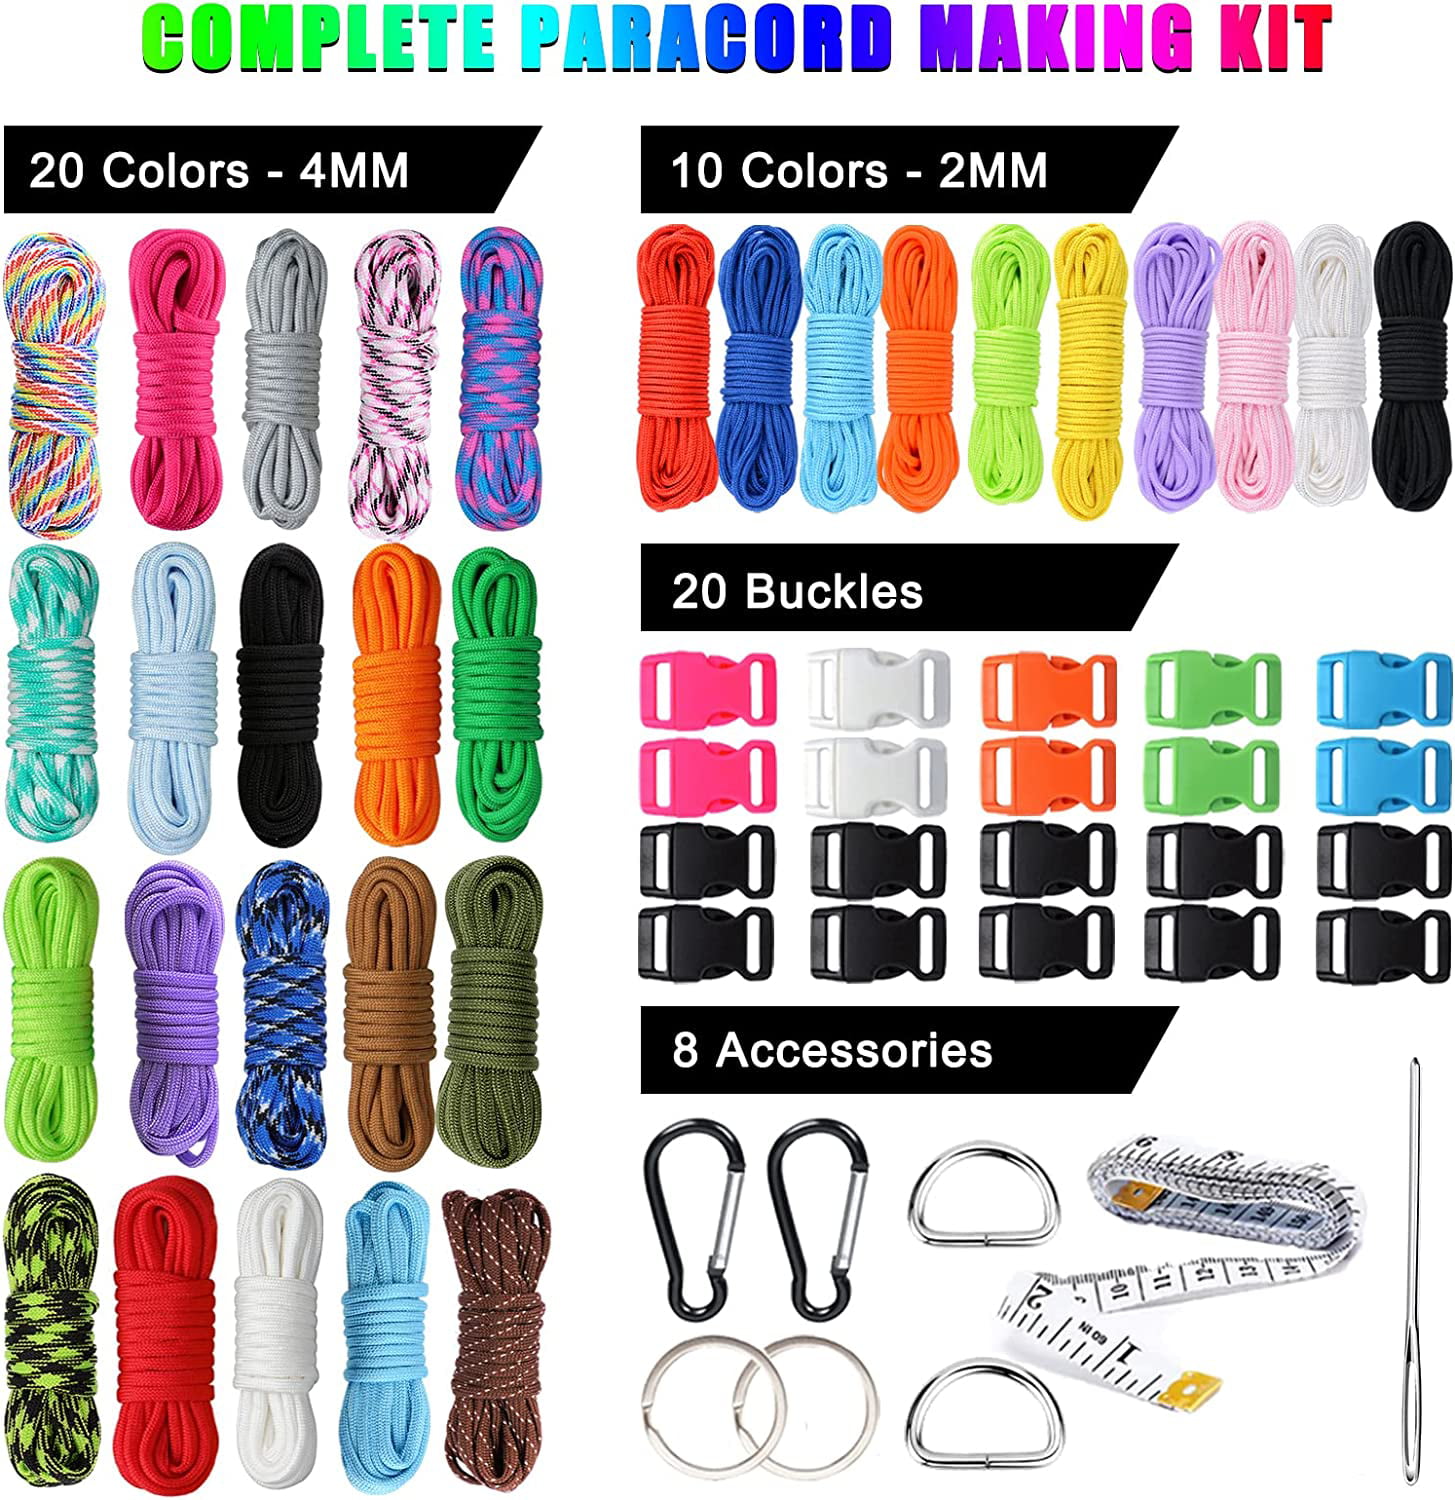 DIY Ultimate Paracord Kit – 30 Feet of 550 Paracord & 8 Essential